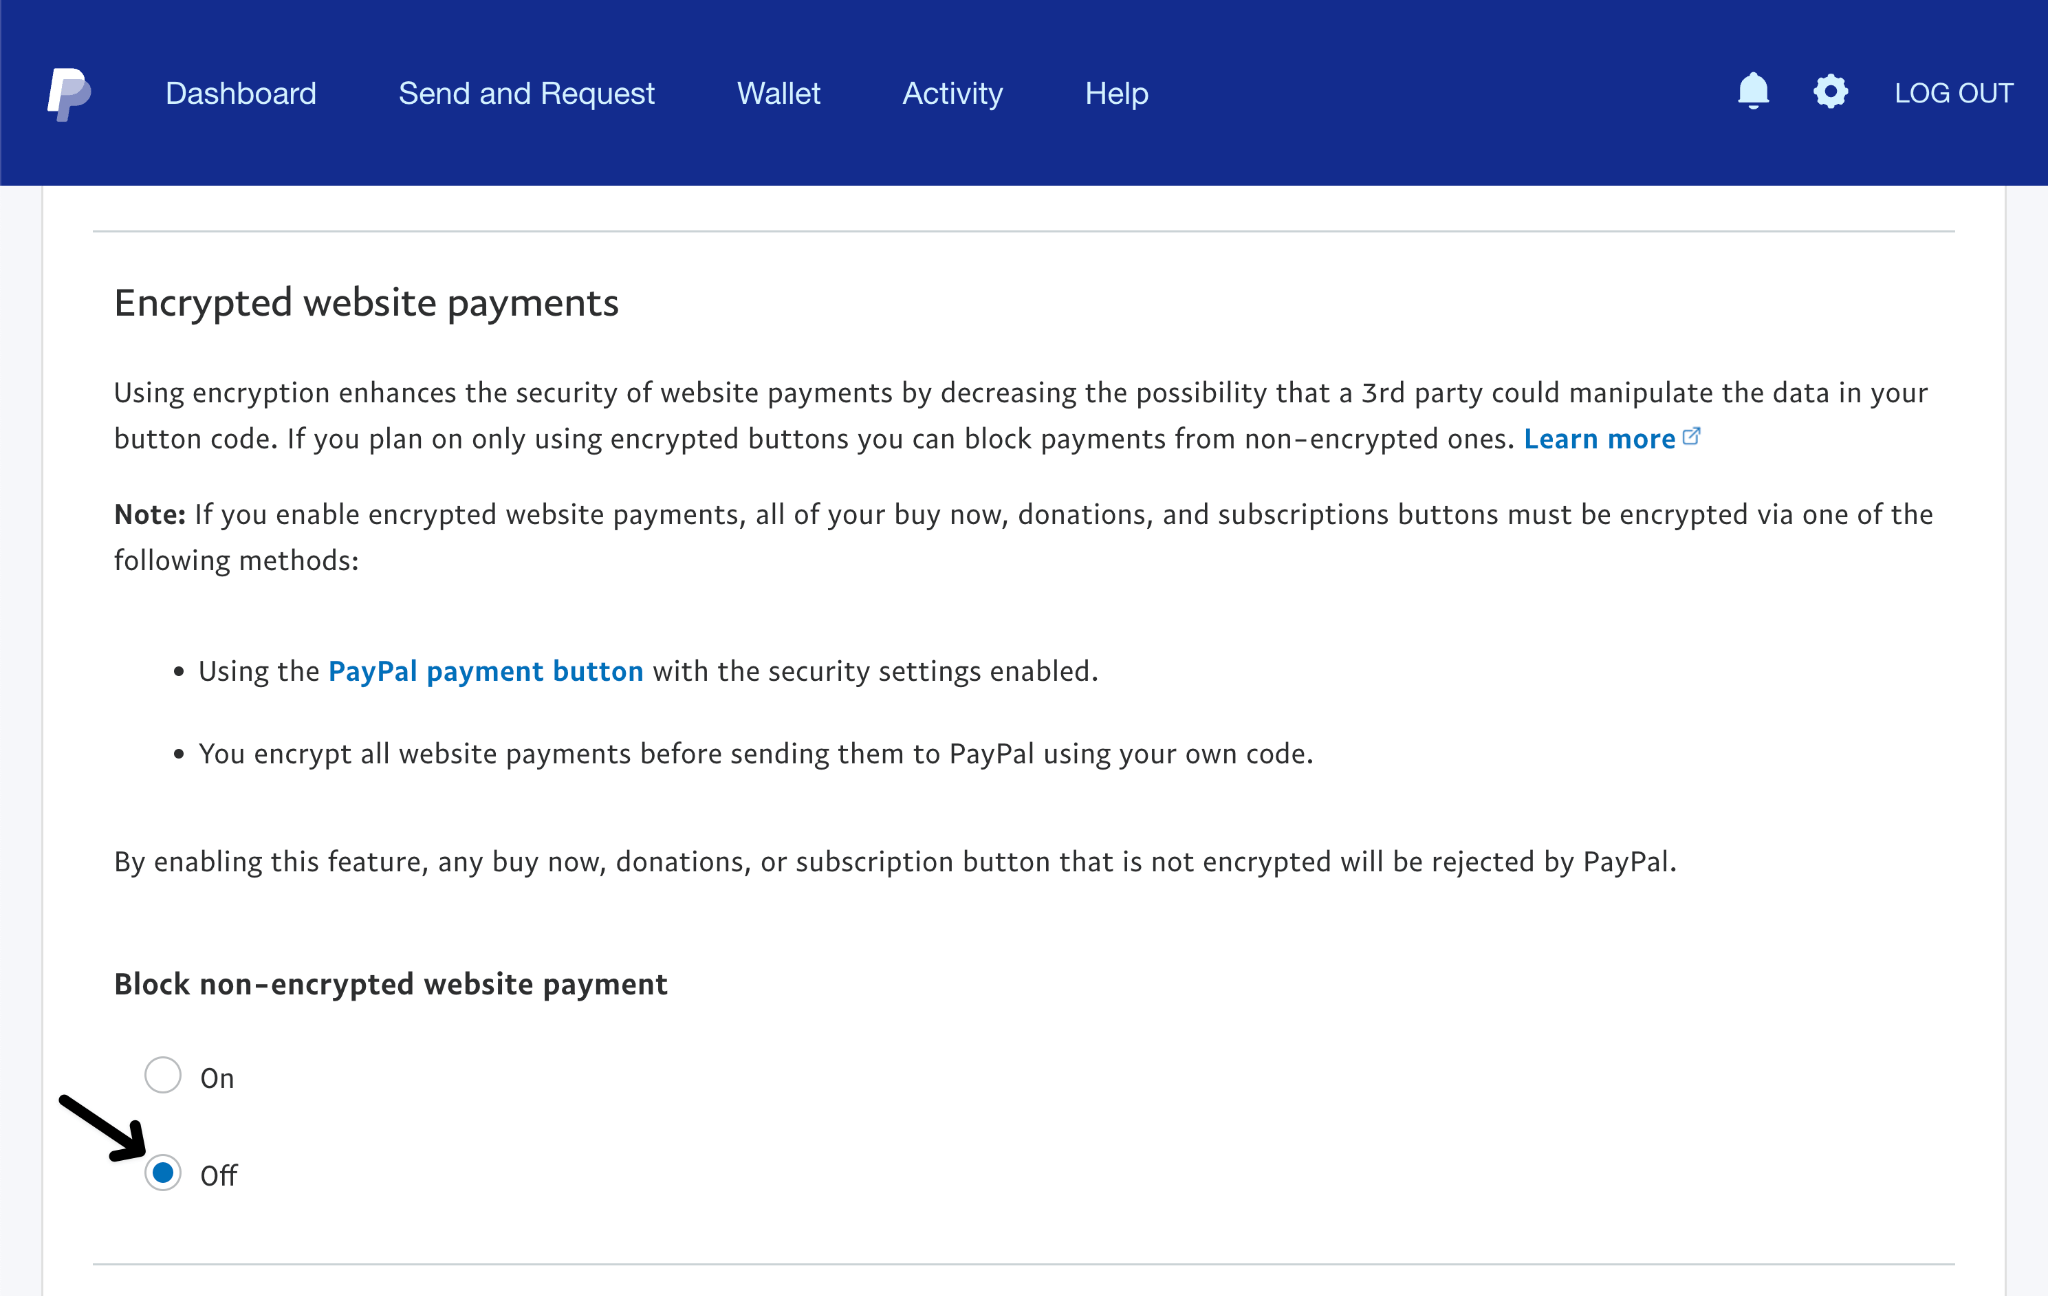 Encrypt website payments to fix PayPal checkout not working or loading